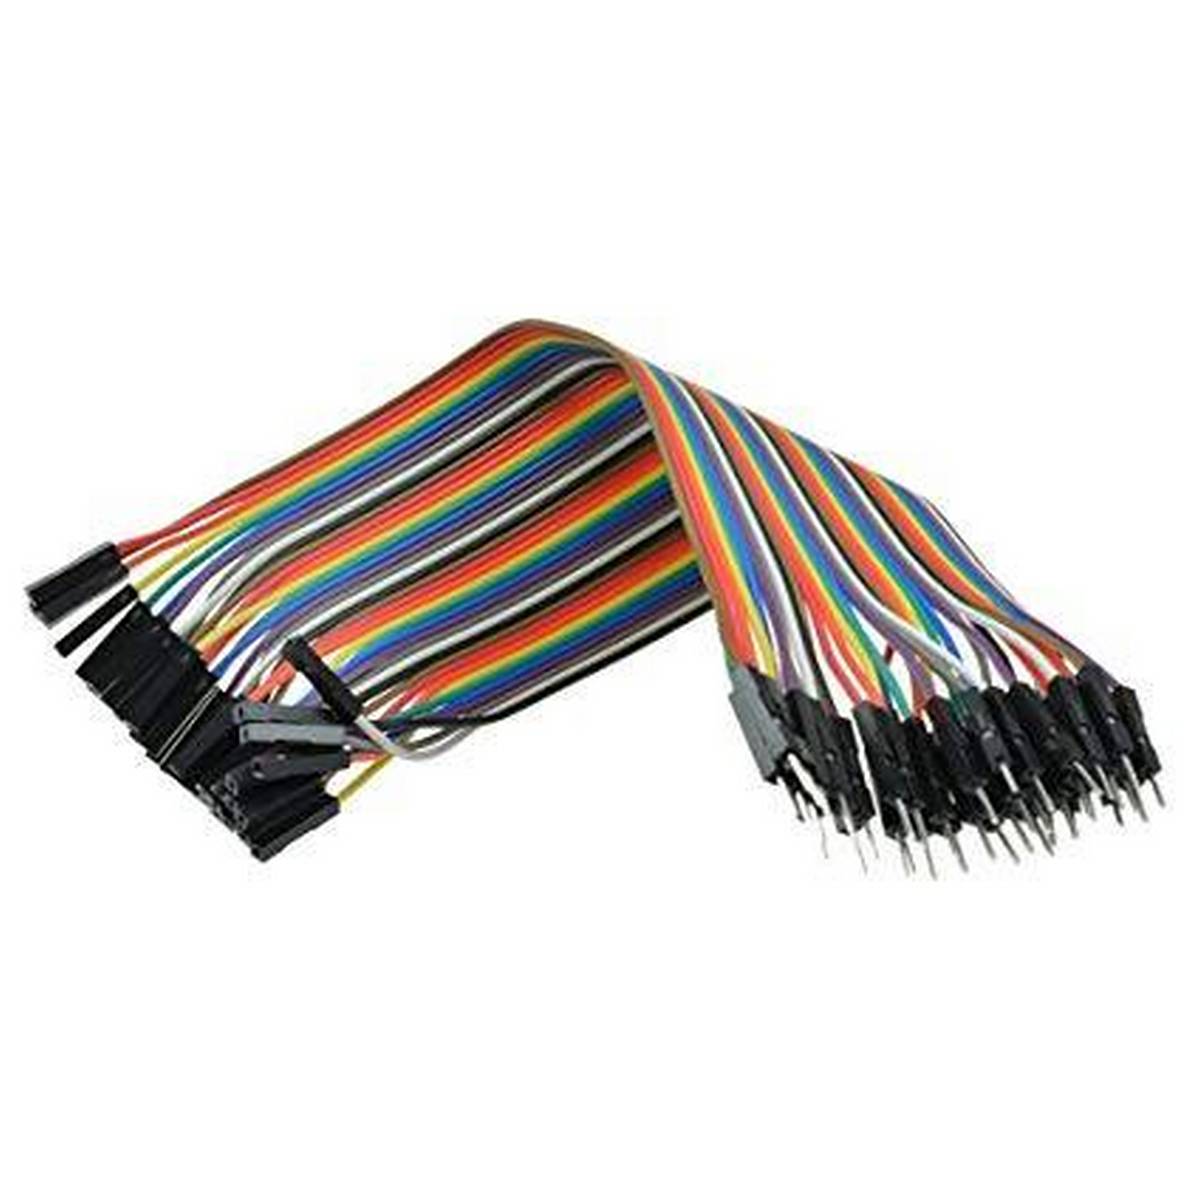 Jumper Wires 40 Pins Male To Female - 20cm For Breadboard, Arduino